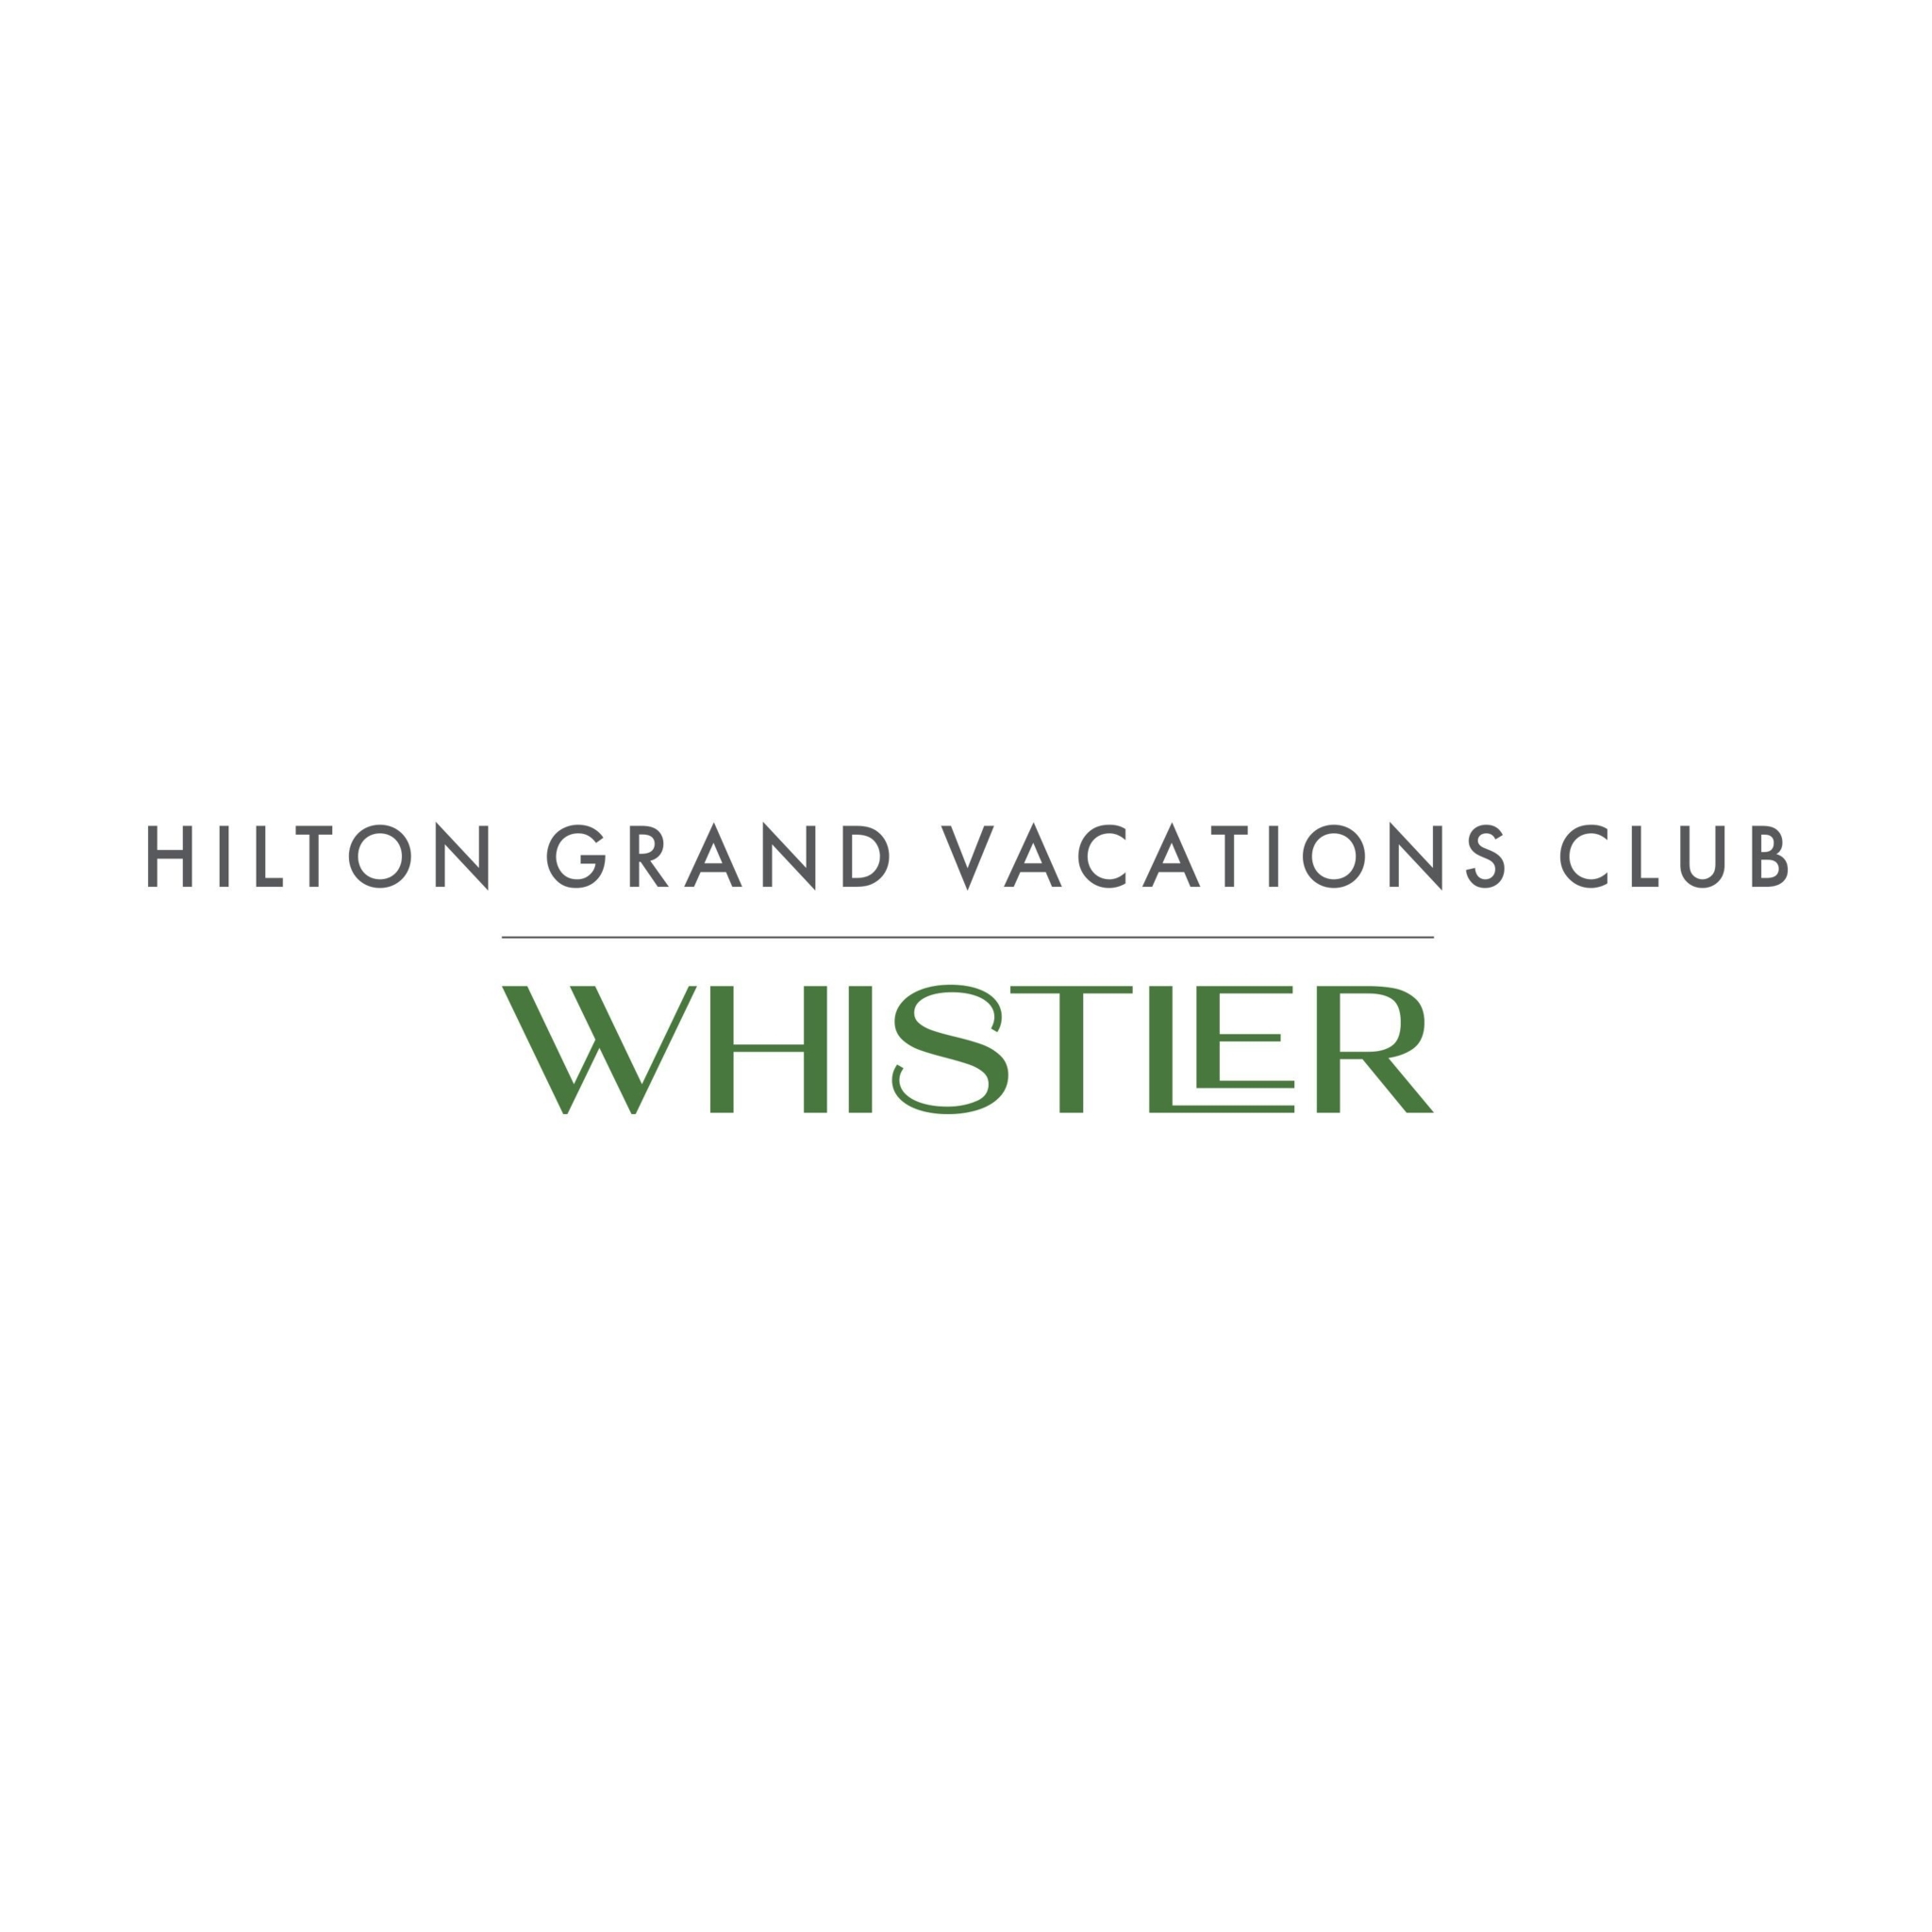 Hilton Grand Vacations Club Whistler - Hotels